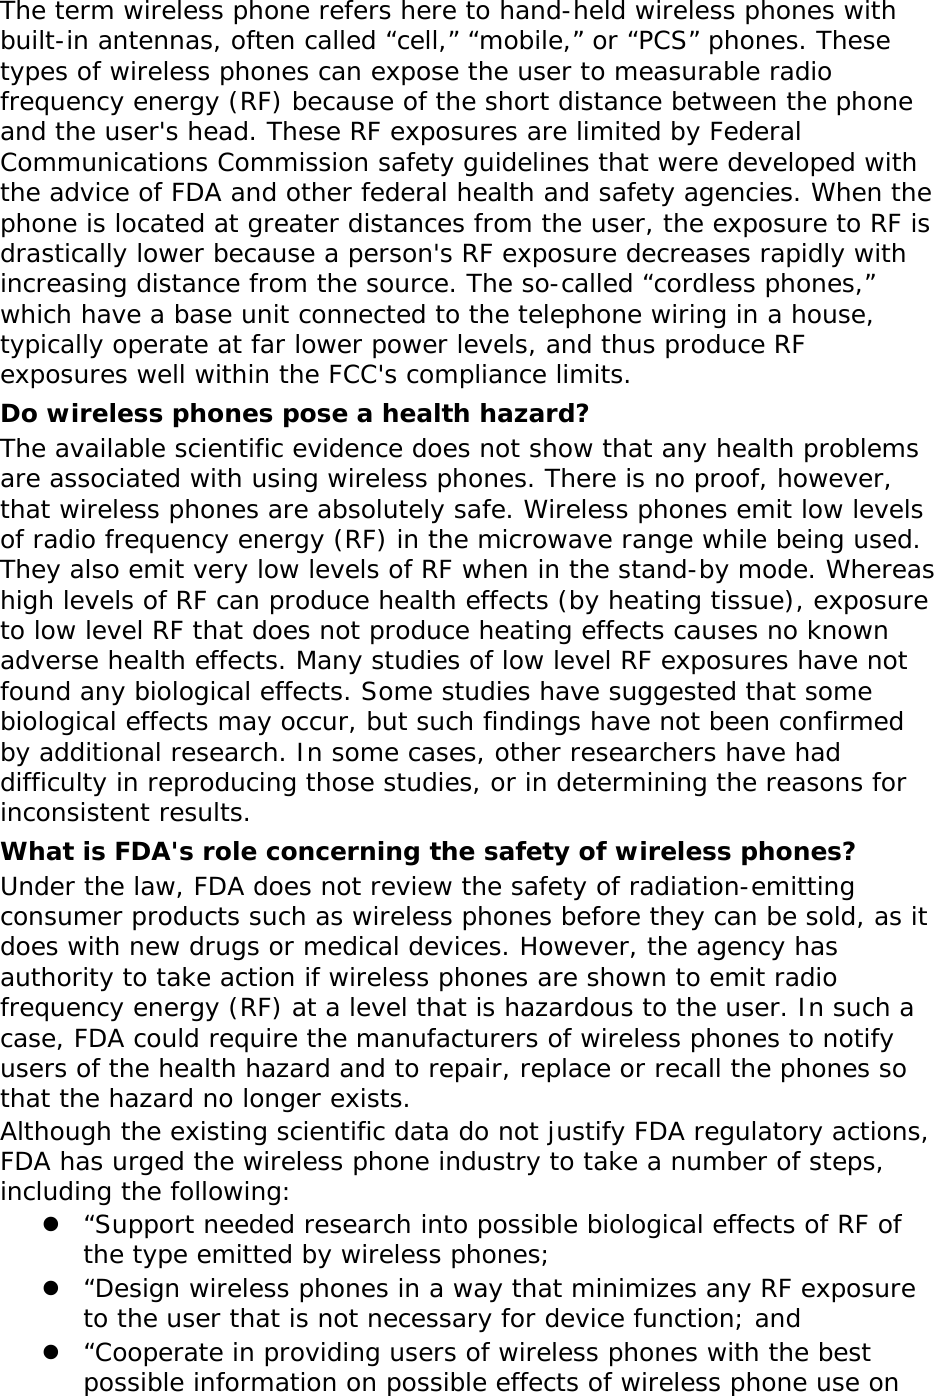 The term wireless phone refers here to hand-held wireless phones with built-in antennas, often called “cell,” “mobile,” or “PCS” phones. These types of wireless phones can expose the user to measurable radio frequency energy (RF) because of the short distance between the phone and the user&apos;s head. These RF exposures are limited by Federal Communications Commission safety guidelines that were developed with the advice of FDA and other federal health and safety agencies. When the phone is located at greater distances from the user, the exposure to RF is drastically lower because a person&apos;s RF exposure decreases rapidly with increasing distance from the source. The so-called “cordless phones,” which have a base unit connected to the telephone wiring in a house, typically operate at far lower power levels, and thus produce RF exposures well within the FCC&apos;s compliance limits. Do wireless phones pose a health hazard? The available scientific evidence does not show that any health problems are associated with using wireless phones. There is no proof, however, that wireless phones are absolutely safe. Wireless phones emit low levels of radio frequency energy (RF) in the microwave range while being used. They also emit very low levels of RF when in the stand-by mode. Whereas high levels of RF can produce health effects (by heating tissue), exposure to low level RF that does not produce heating effects causes no known adverse health effects. Many studies of low level RF exposures have not found any biological effects. Some studies have suggested that some biological effects may occur, but such findings have not been confirmed by additional research. In some cases, other researchers have had difficulty in reproducing those studies, or in determining the reasons for inconsistent results. What is FDA&apos;s role concerning the safety of wireless phones? Under the law, FDA does not review the safety of radiation-emitting consumer products such as wireless phones before they can be sold, as it does with new drugs or medical devices. However, the agency has authority to take action if wireless phones are shown to emit radio frequency energy (RF) at a level that is hazardous to the user. In such a case, FDA could require the manufacturers of wireless phones to notify users of the health hazard and to repair, replace or recall the phones so that the hazard no longer exists. Although the existing scientific data do not justify FDA regulatory actions, FDA has urged the wireless phone industry to take a number of steps, including the following: z “Support needed research into possible biological effects of RF of the type emitted by wireless phones; z “Design wireless phones in a way that minimizes any RF exposure to the user that is not necessary for device function; and z “Cooperate in providing users of wireless phones with the best possible information on possible effects of wireless phone use on 